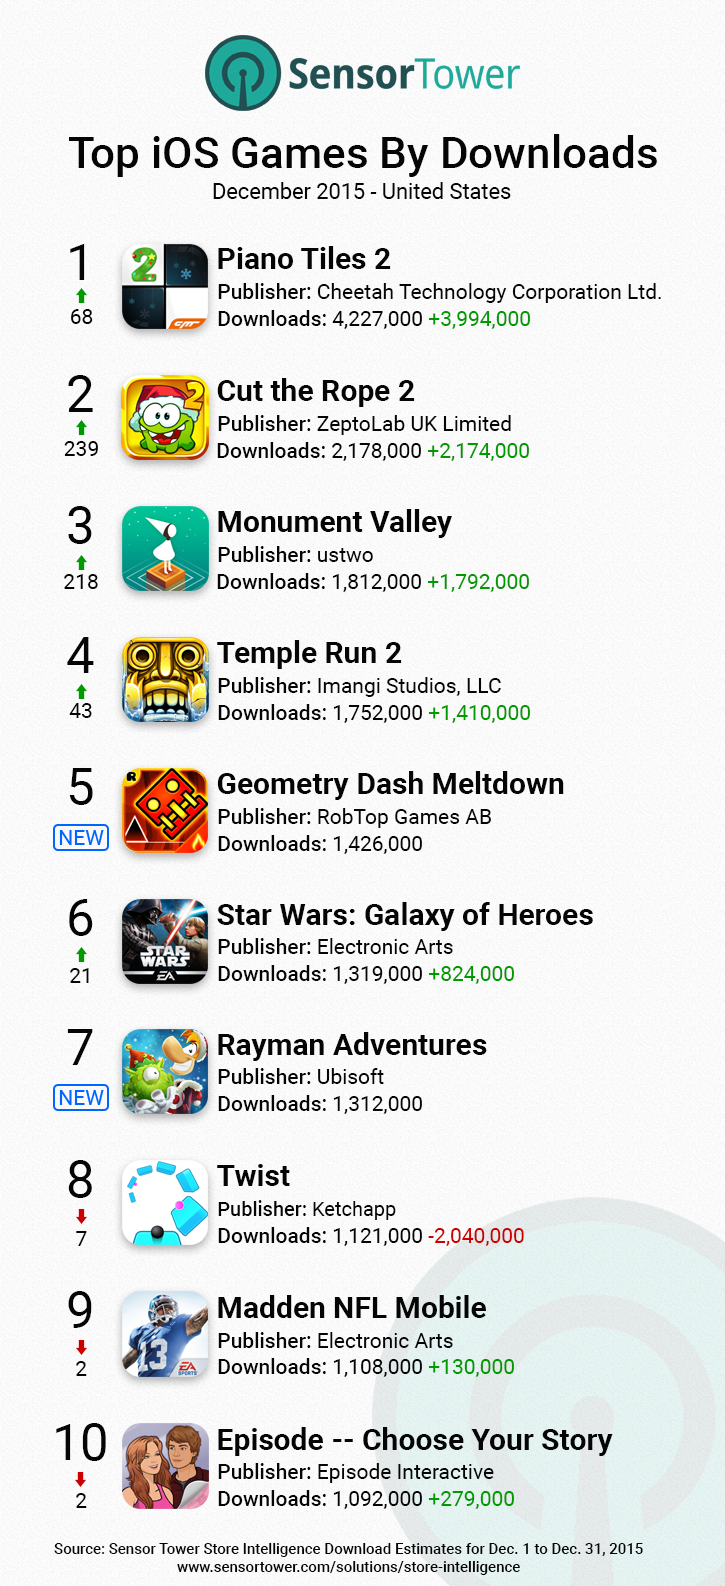 Tower's iOS Gaming Leaders for December